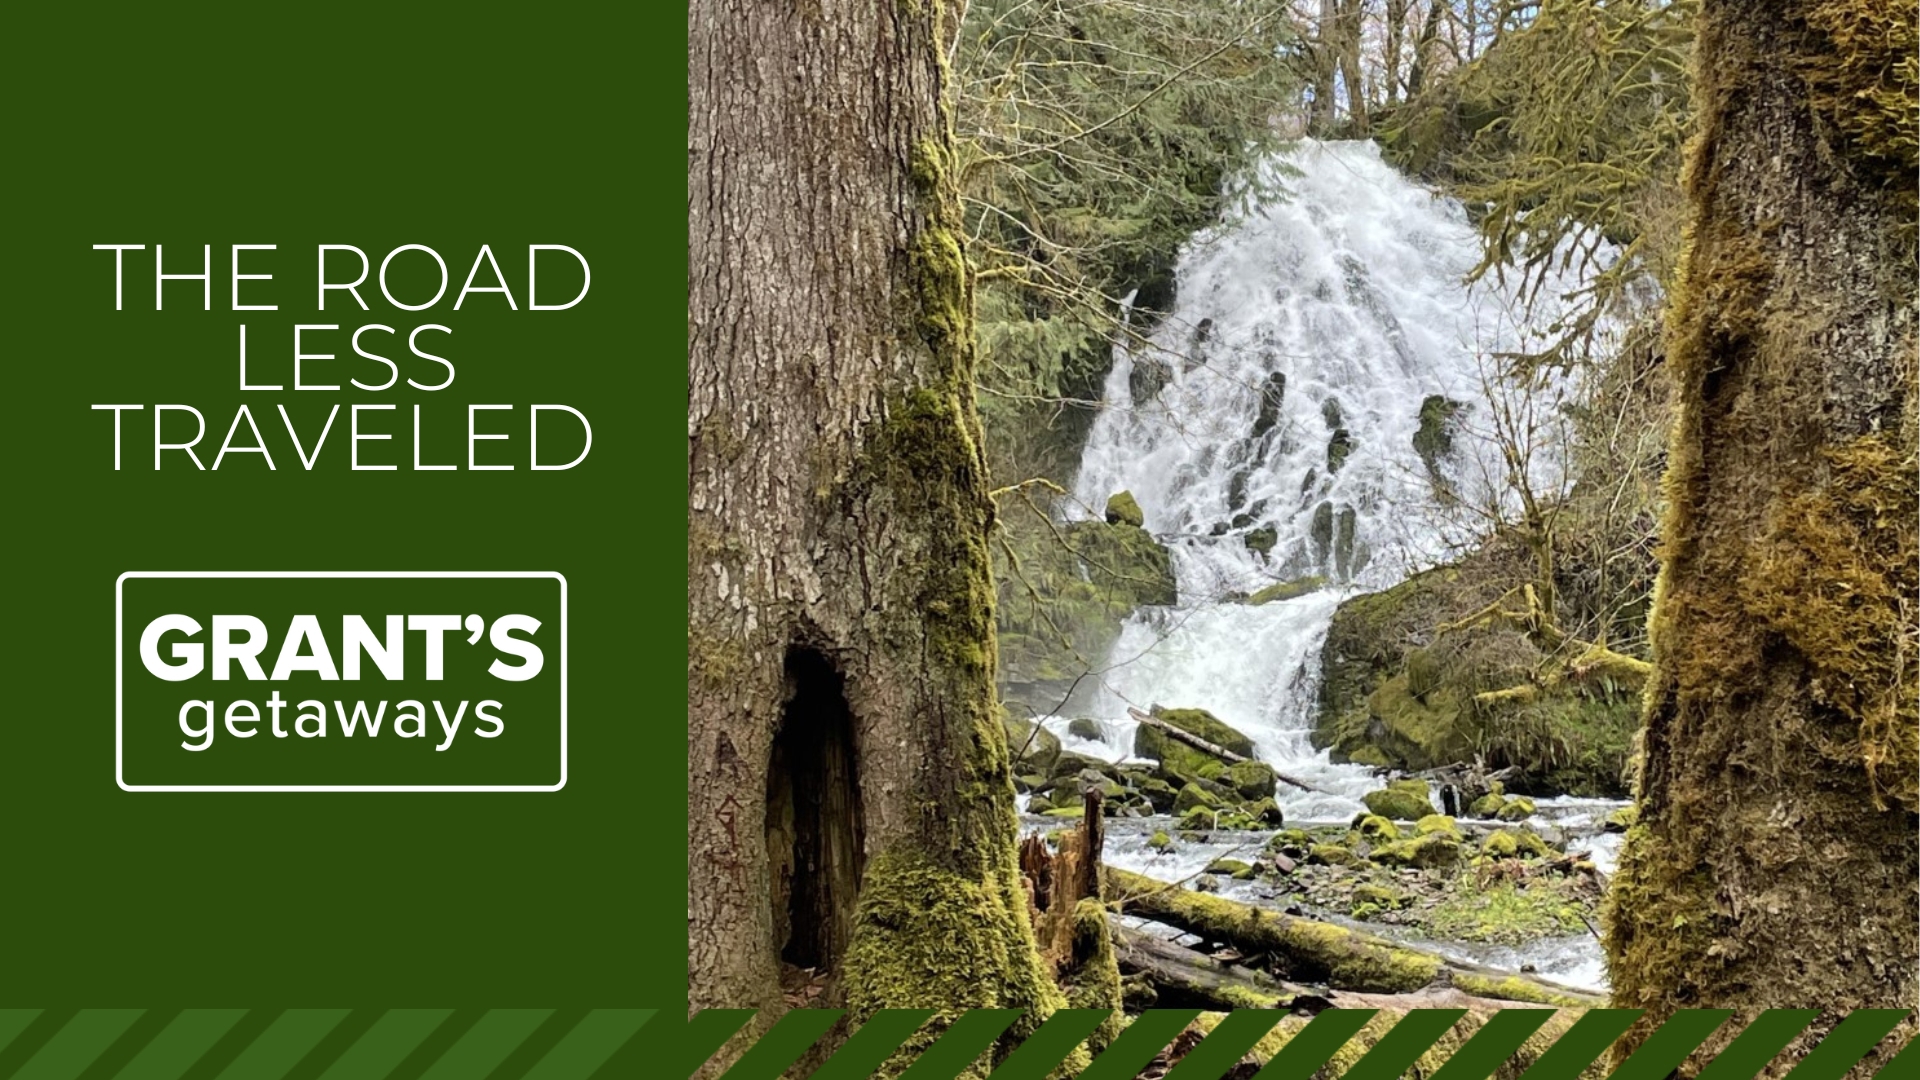 From wildlife to waterfalls, Highway 202 offers a journey that's well worth taking the extra time.